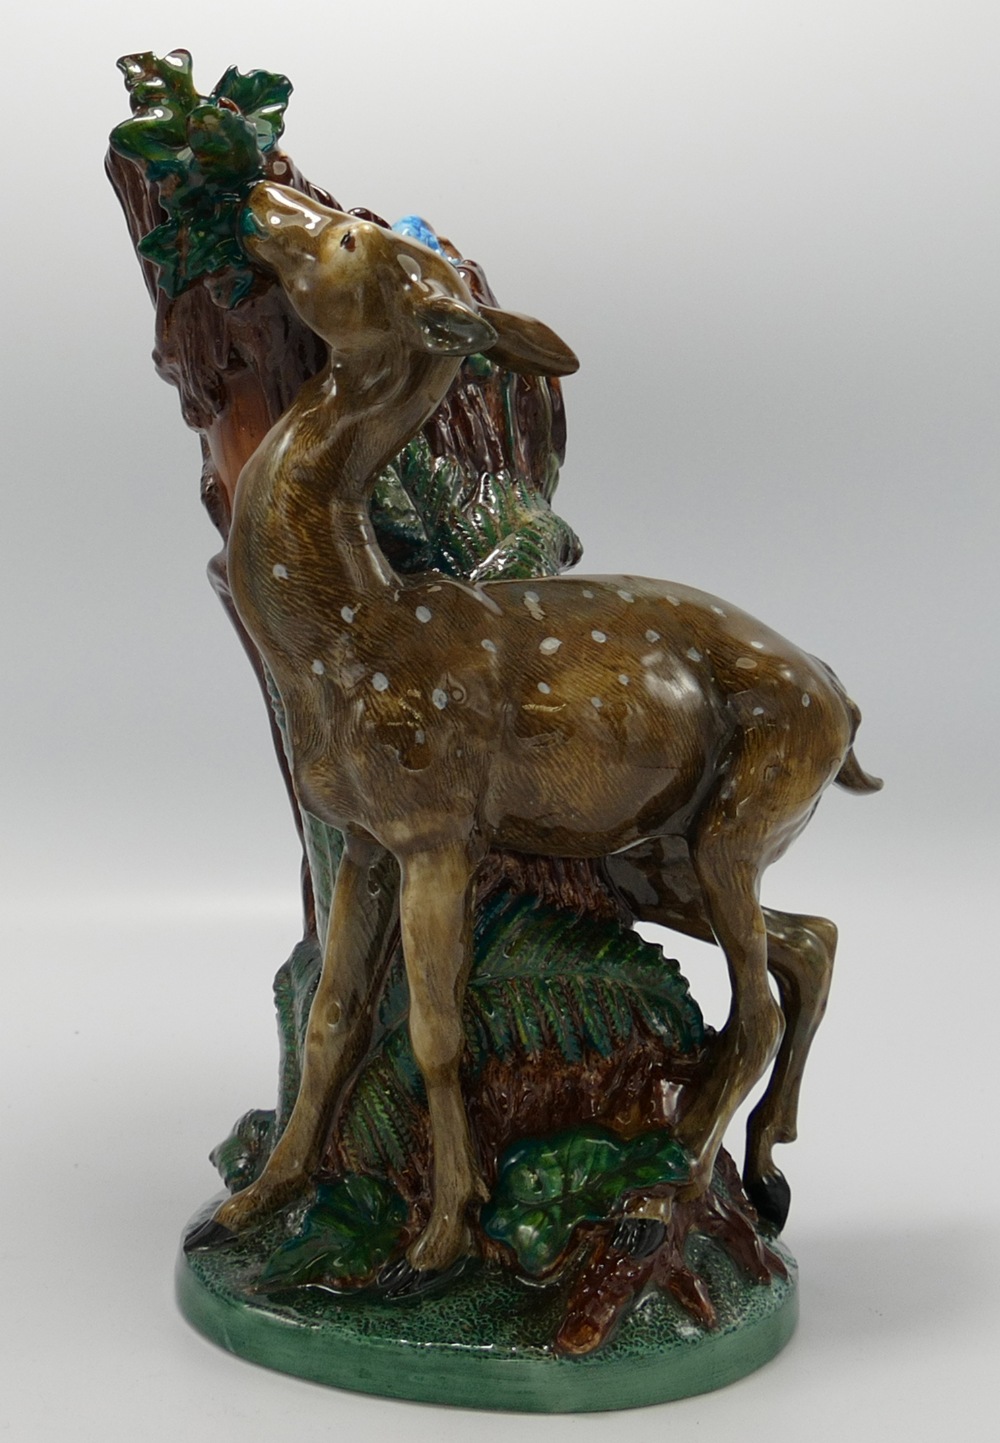 Mintons Majolica miniature model of a Fawn: 2002 limited edition, height 25.5cm.